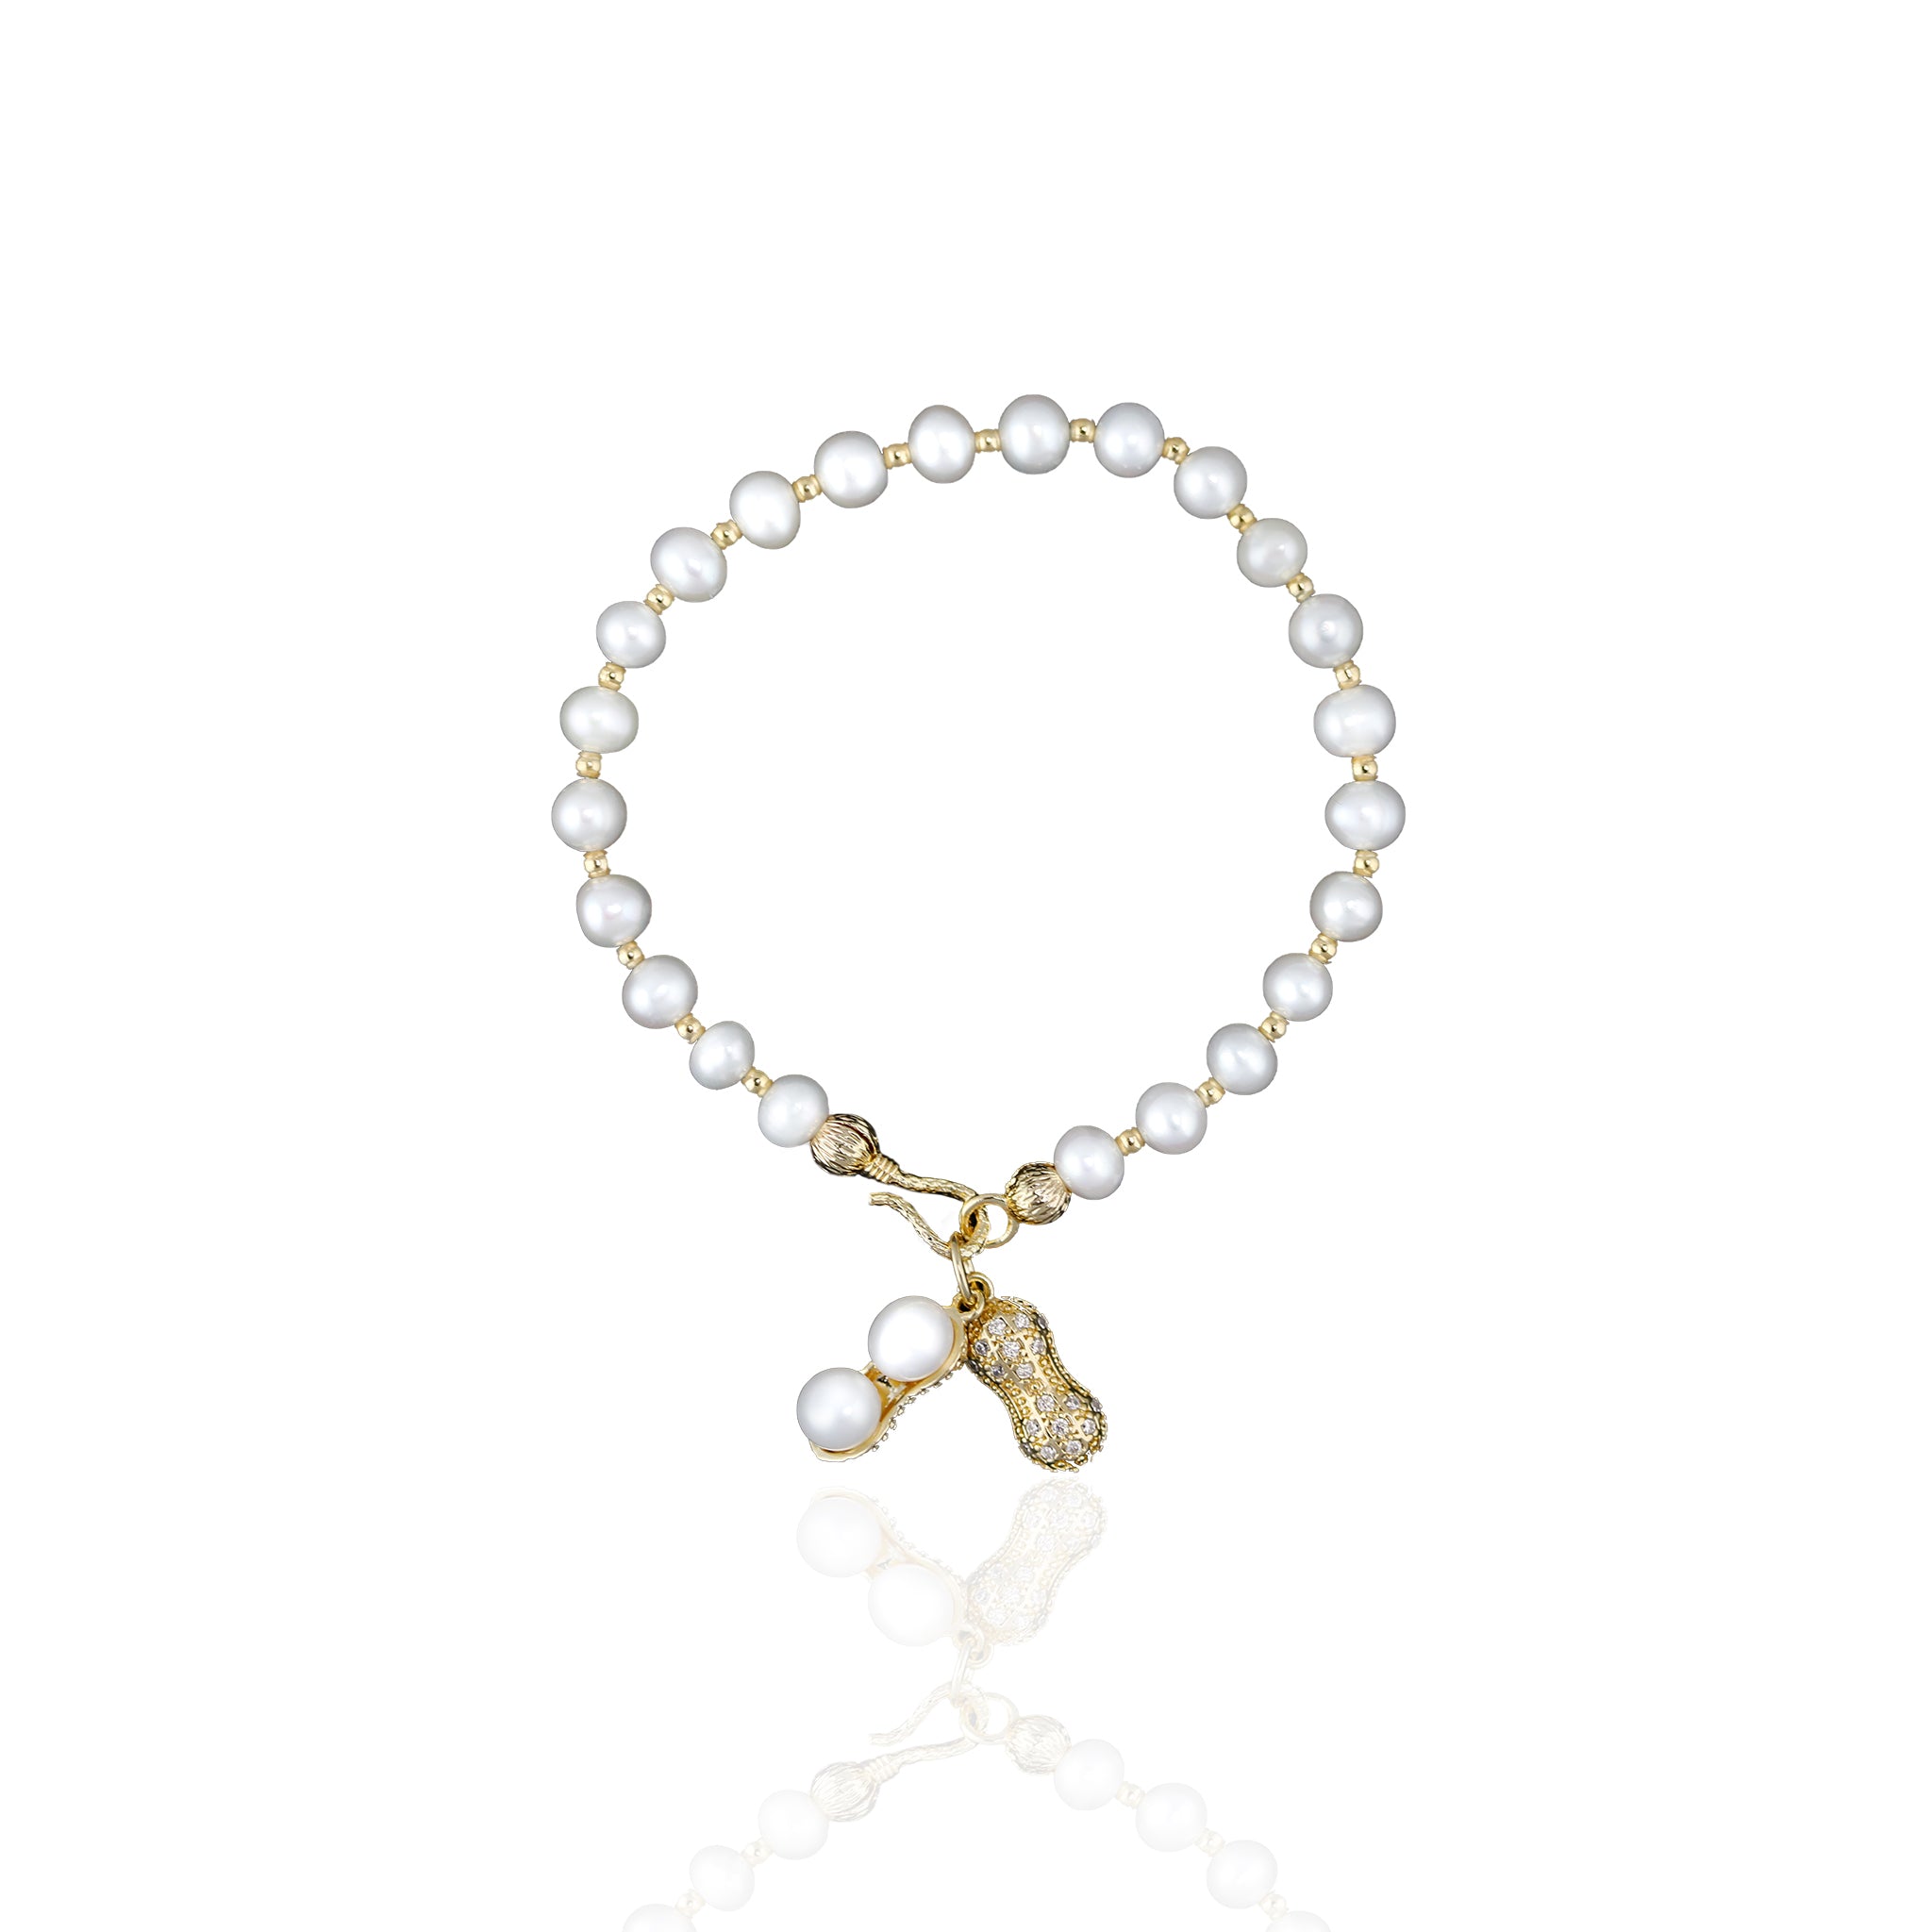 Freshwater Pearl Peanut Charm Bracelet in 14K Gold and Gemstones - L'Amour Pearls